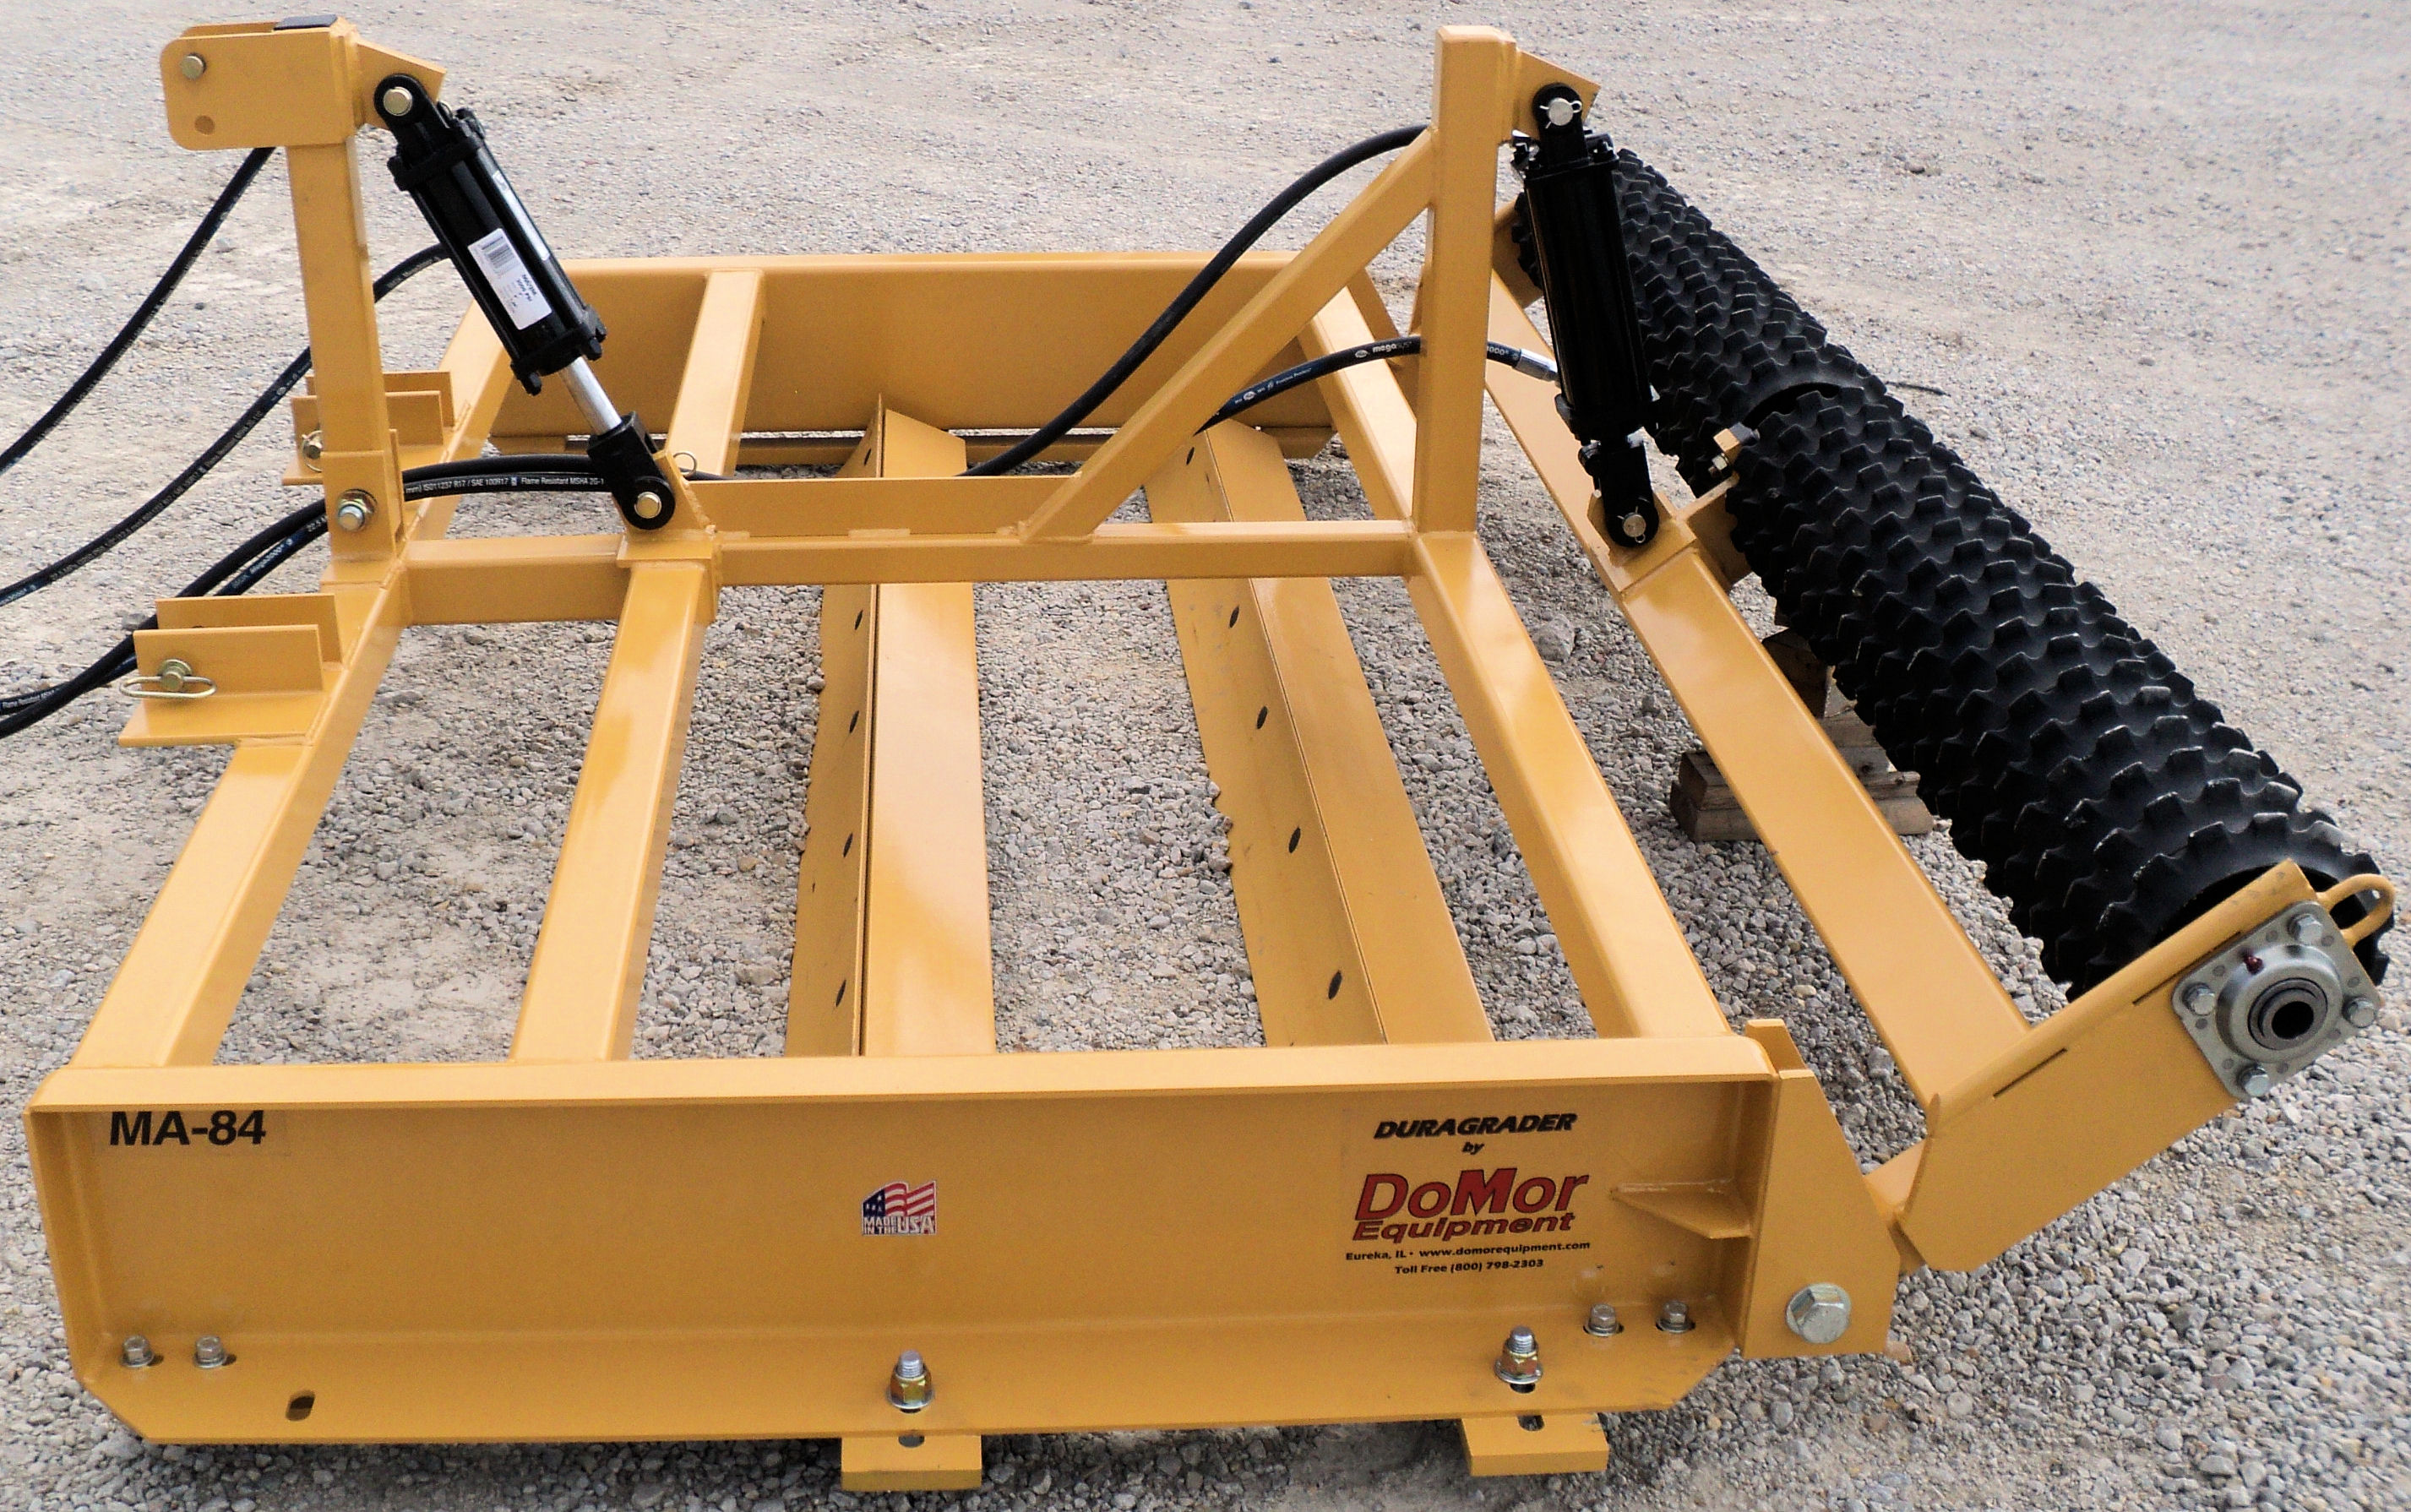 The Culti-Packer Add-on attachment works great for pulverizing and breaking up hard clumps and clods, and it can also be used to pack seeds to the proper depth for maximum seed growth for seed beds. 